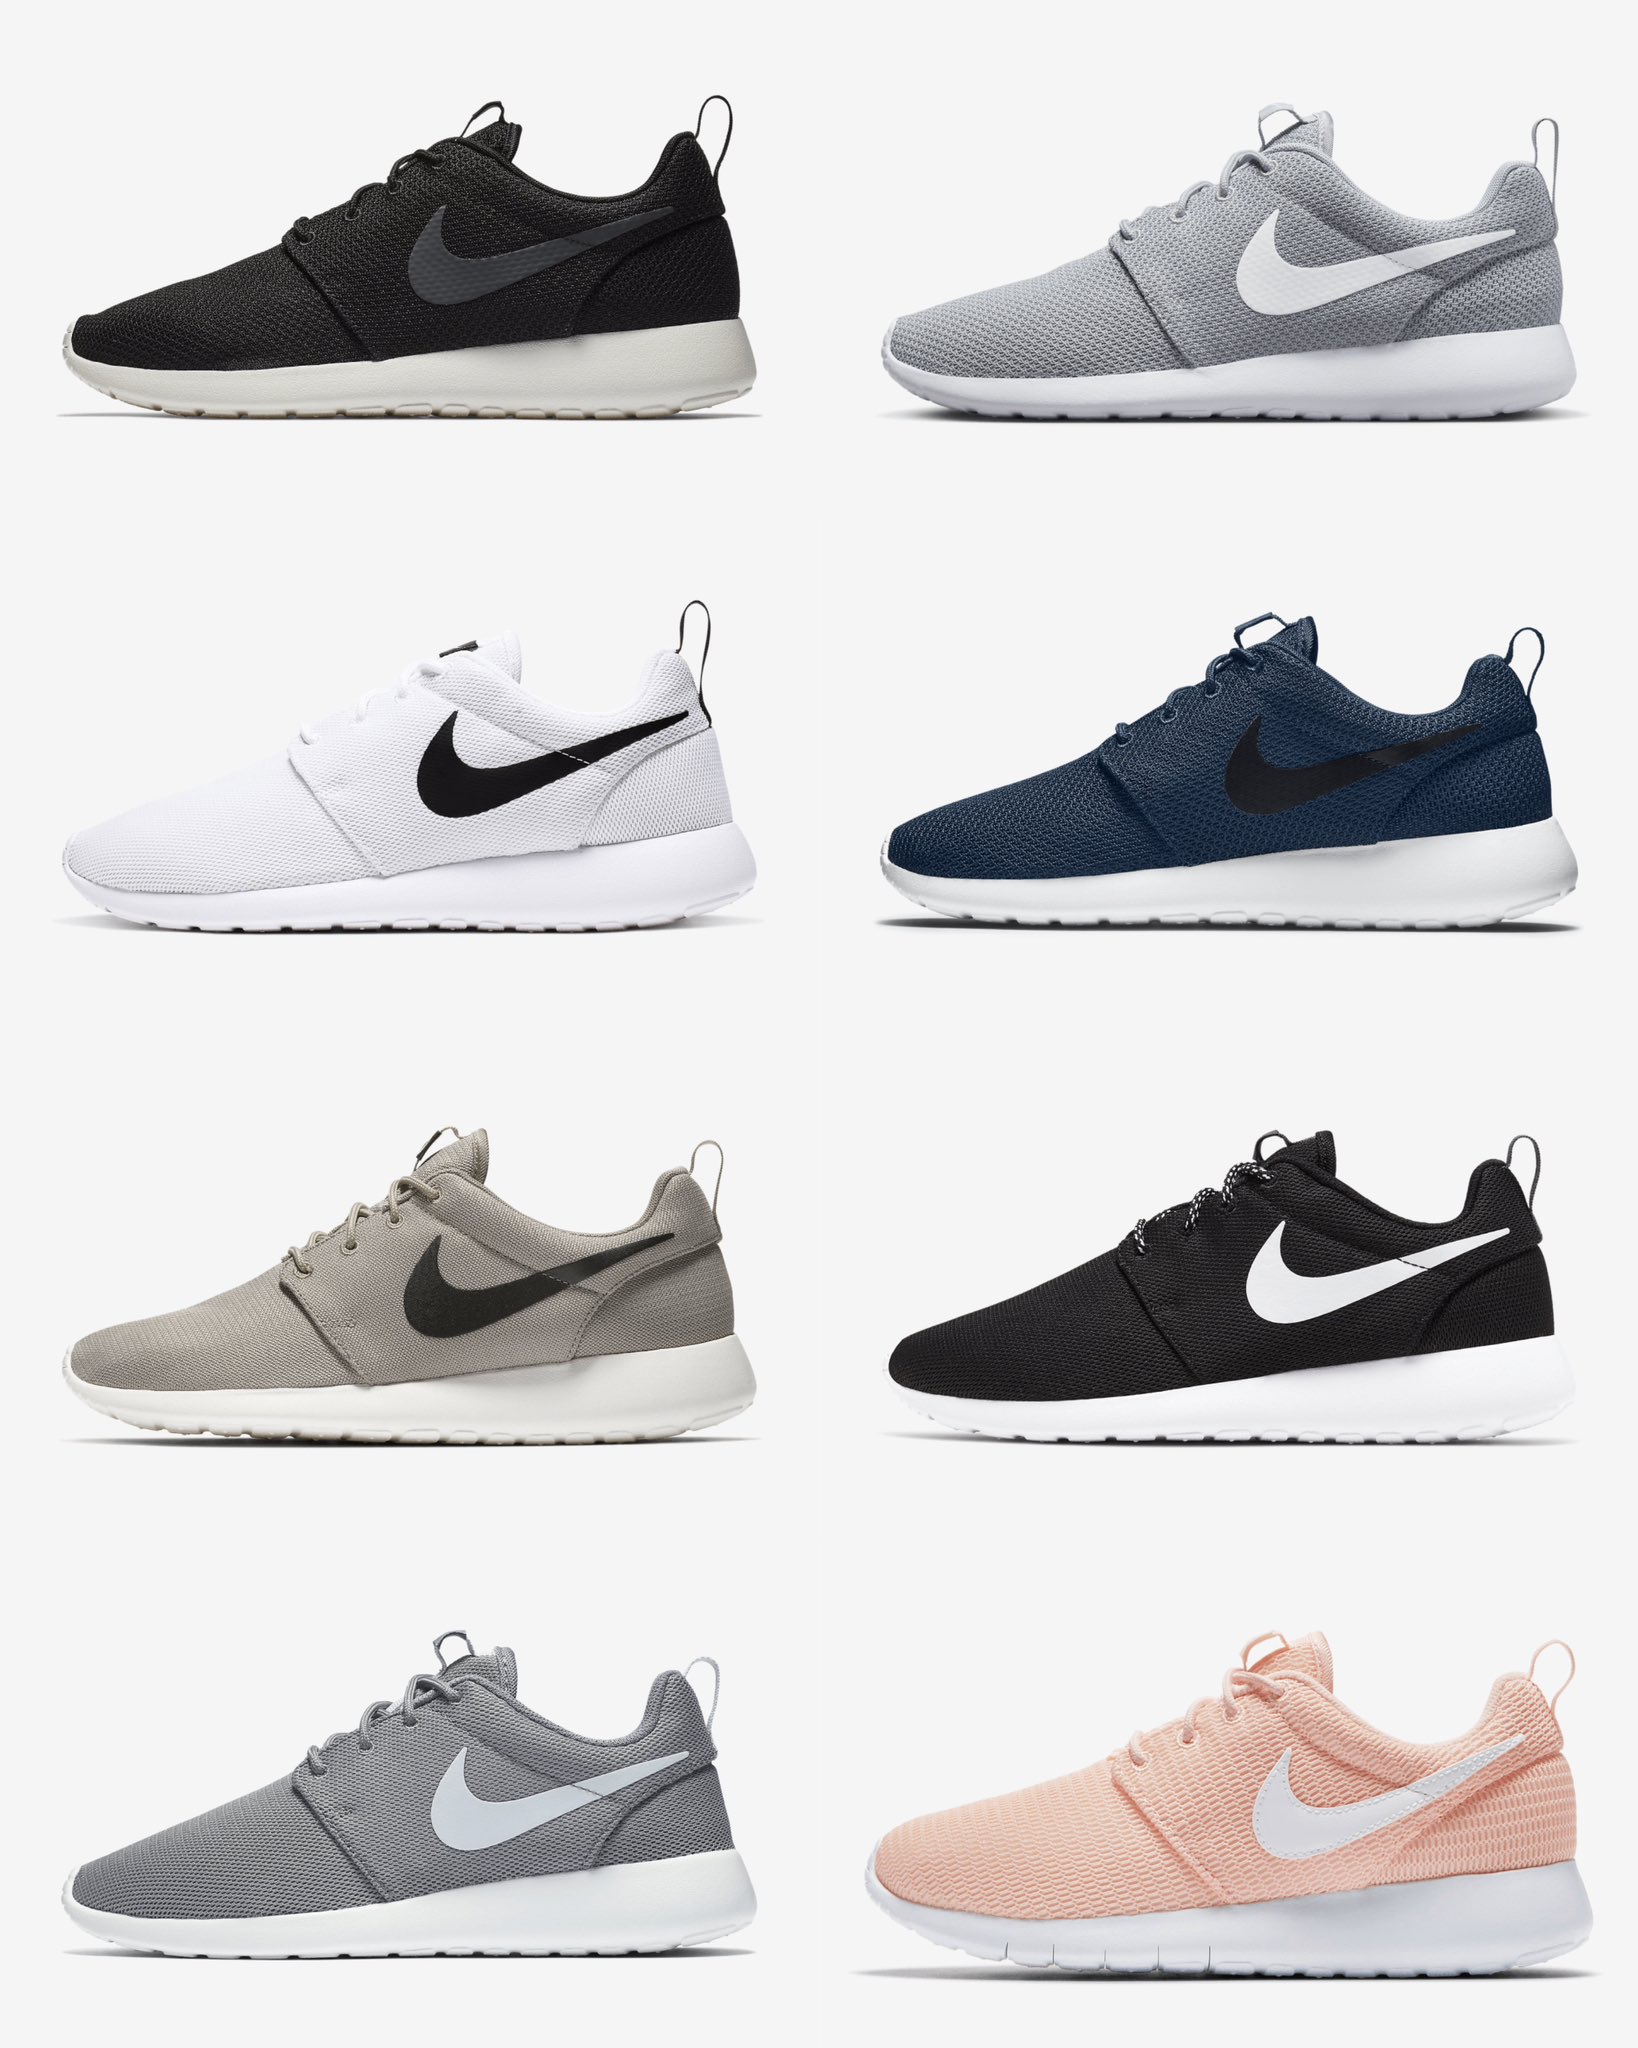 Nice Kicks on Twitter: "Nike is bringing back Nike Roshe Run this fall 👀 Thoughts these returning? @SoleRetriever https://t.co/Dl8zzLTNWL" Twitter